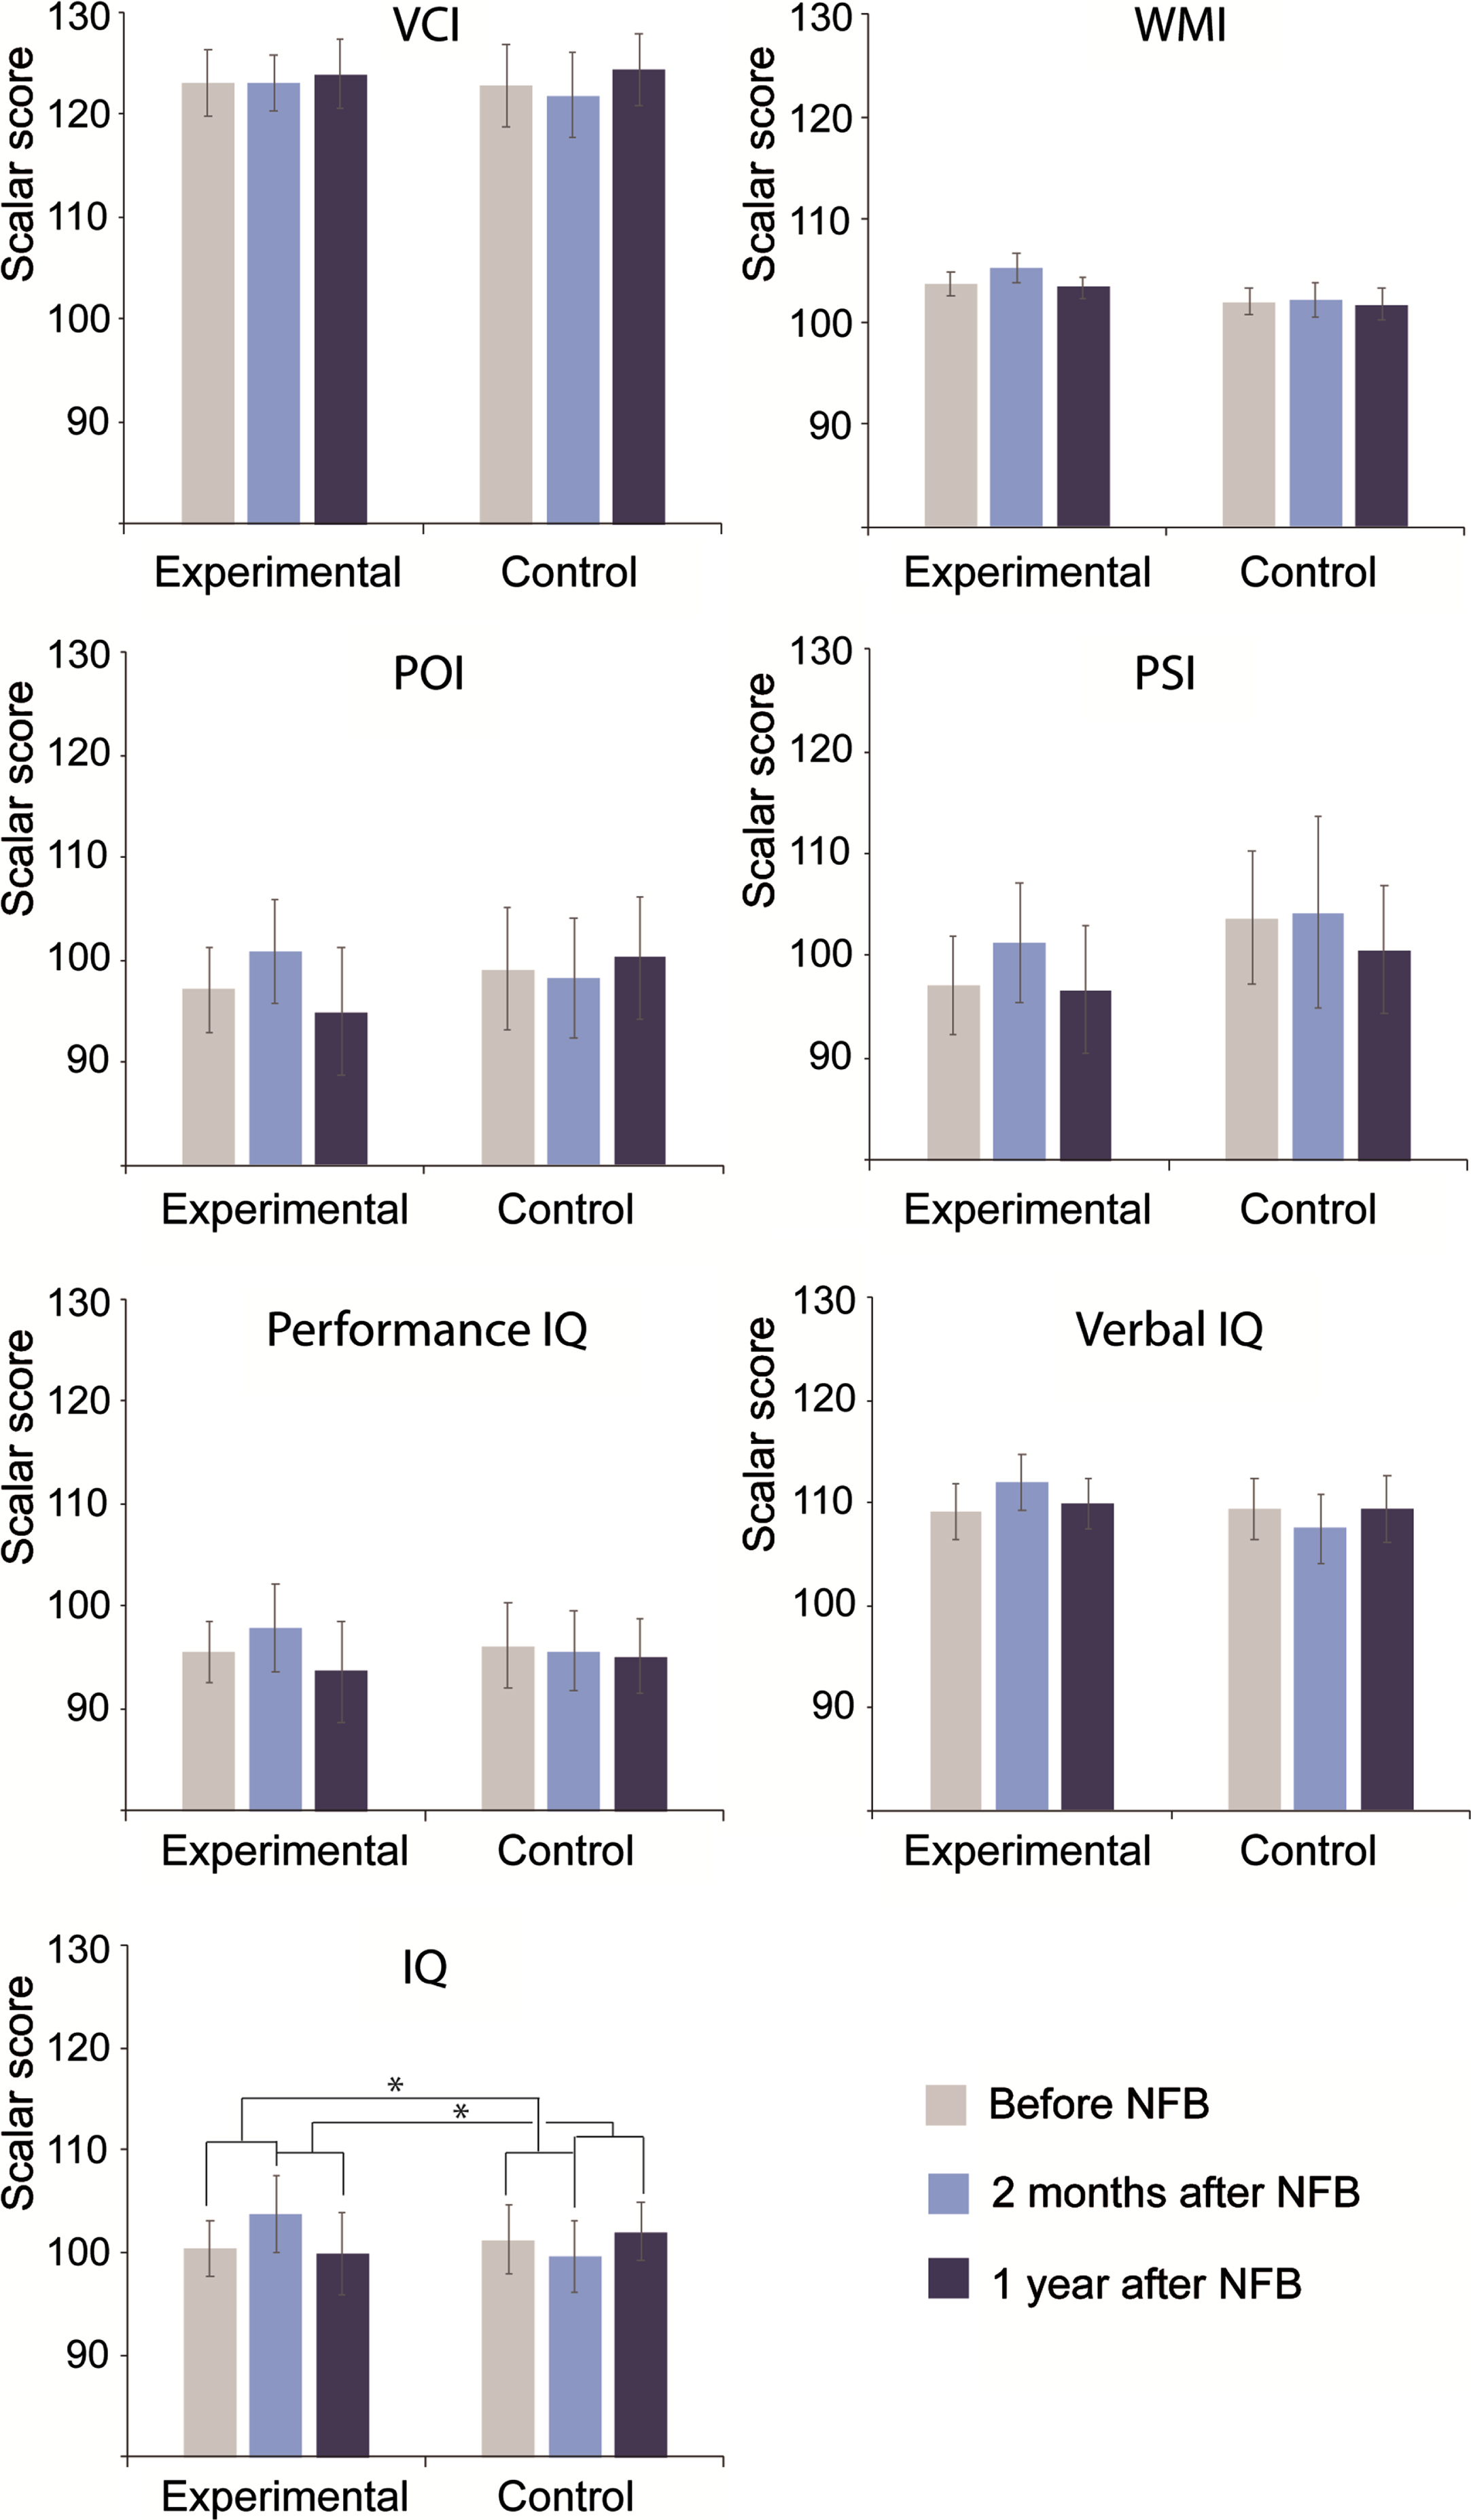 Significant neuropsychological differences over time and between groups in the WAIS-III-R. The y-axes show the standardized scores resulting from neuropsychological assessments in both groups at the three evaluation time points: before treatment, two months after treatment and one year after treatment. VCI, verbal comprehension index; WMI, working memory index; POI, perceptual organization index; PSI, processing speed index; IQ, intelligence quotient. *p < 0.05, **p < 0.01.